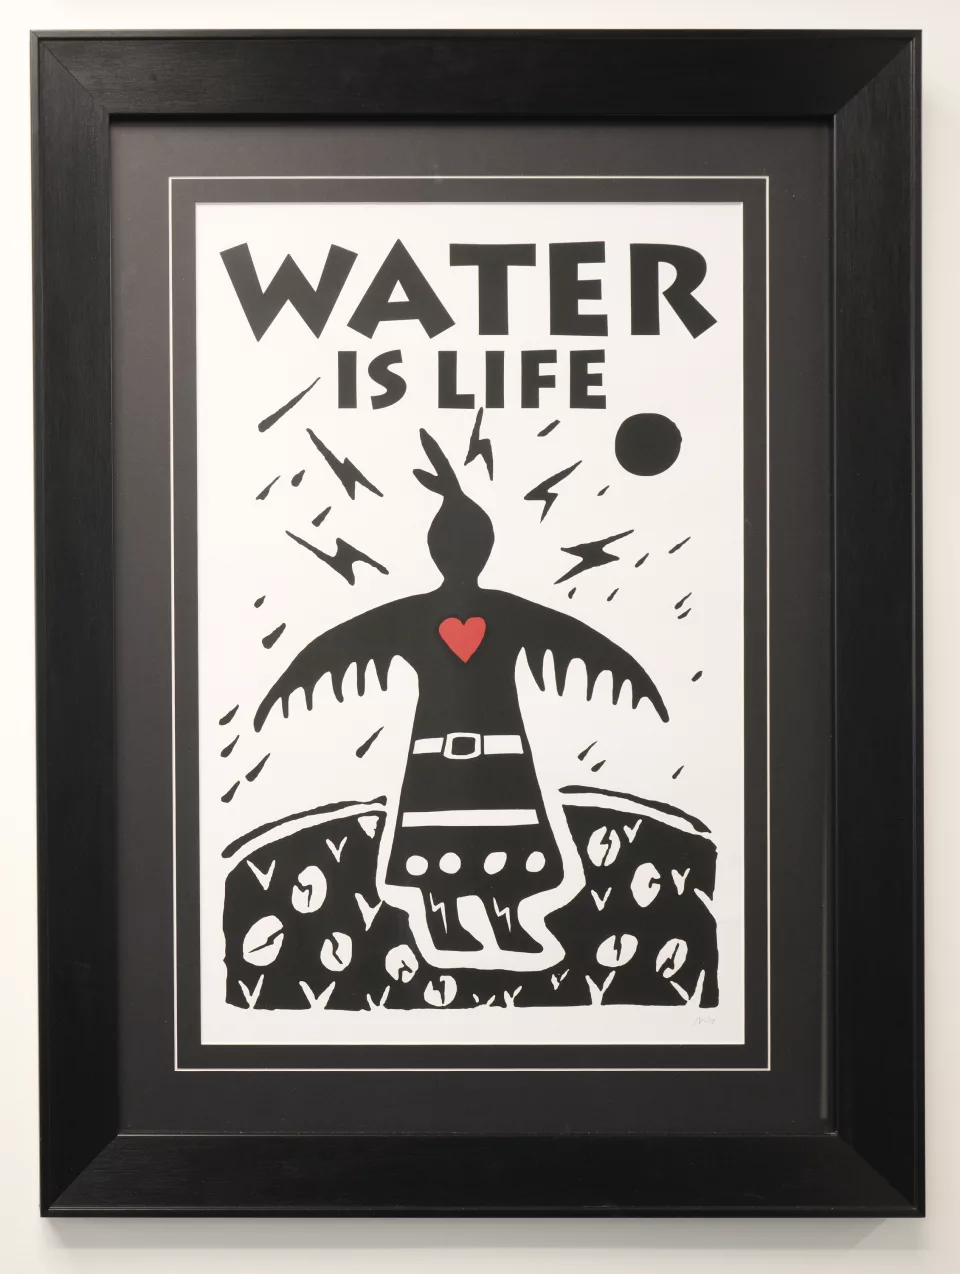 Water Is Life - Not for Sale